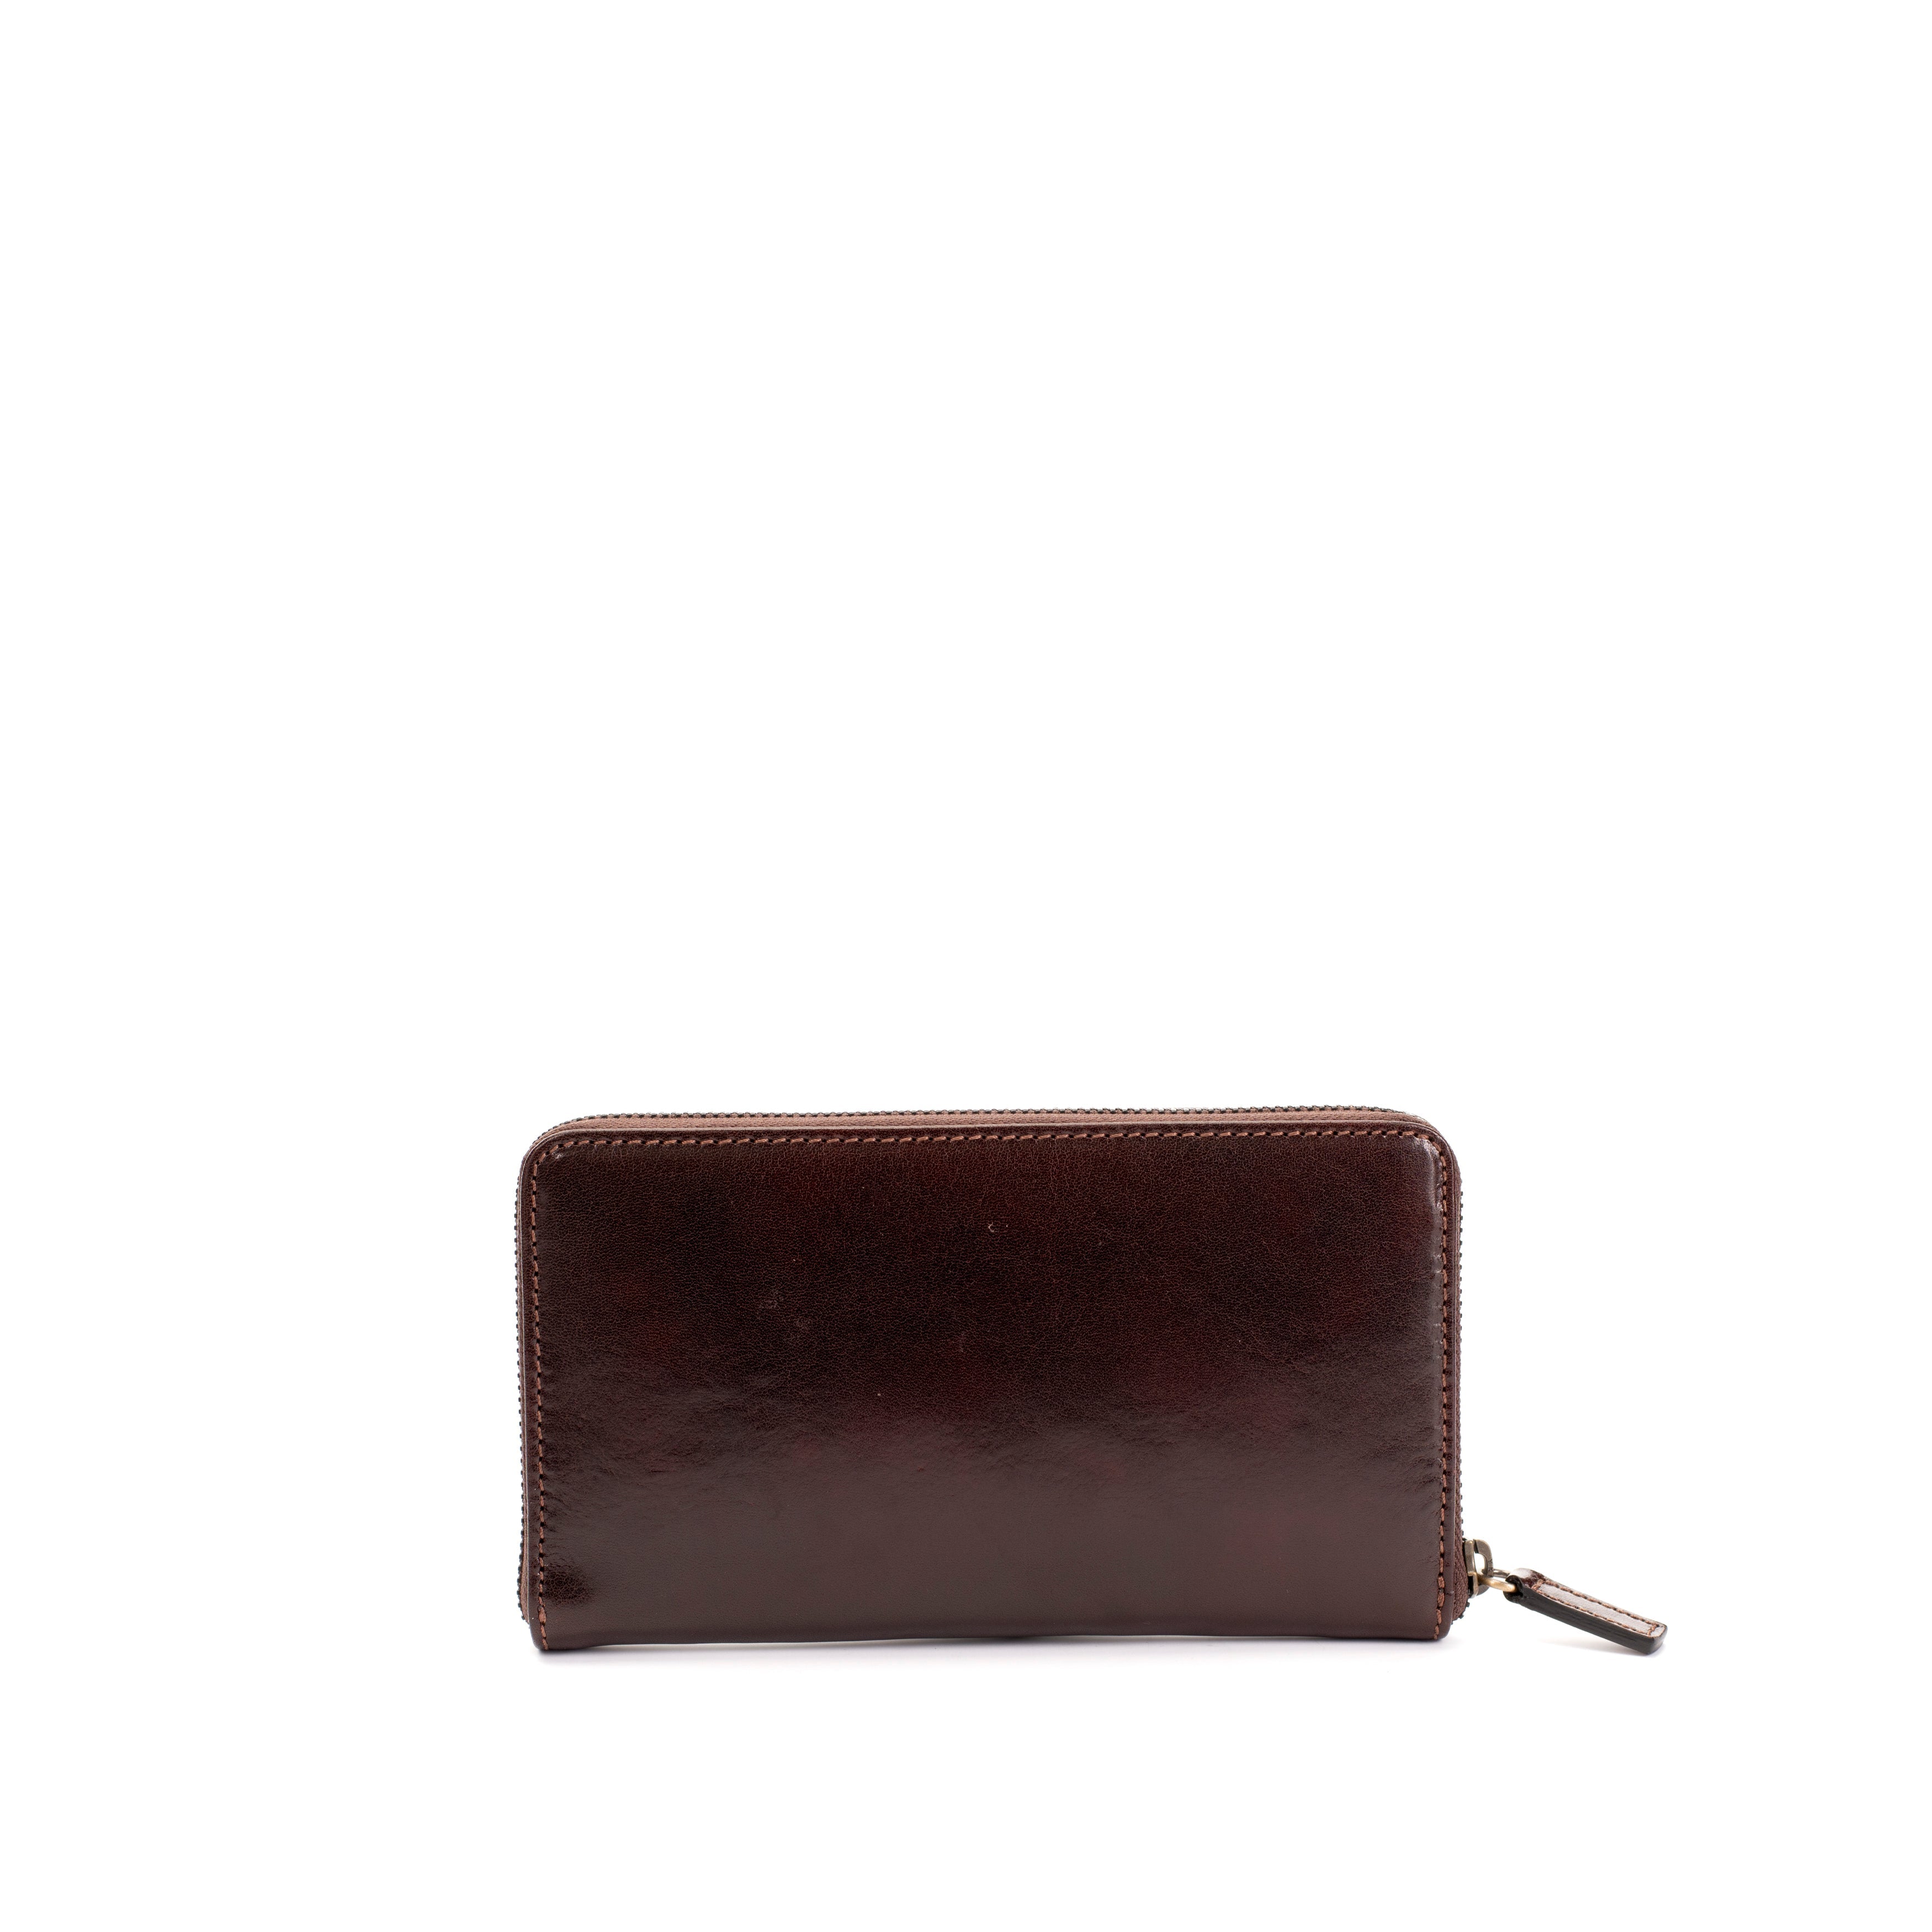 SONIA Veg-Tan Leather Wallet by Gianni Conti